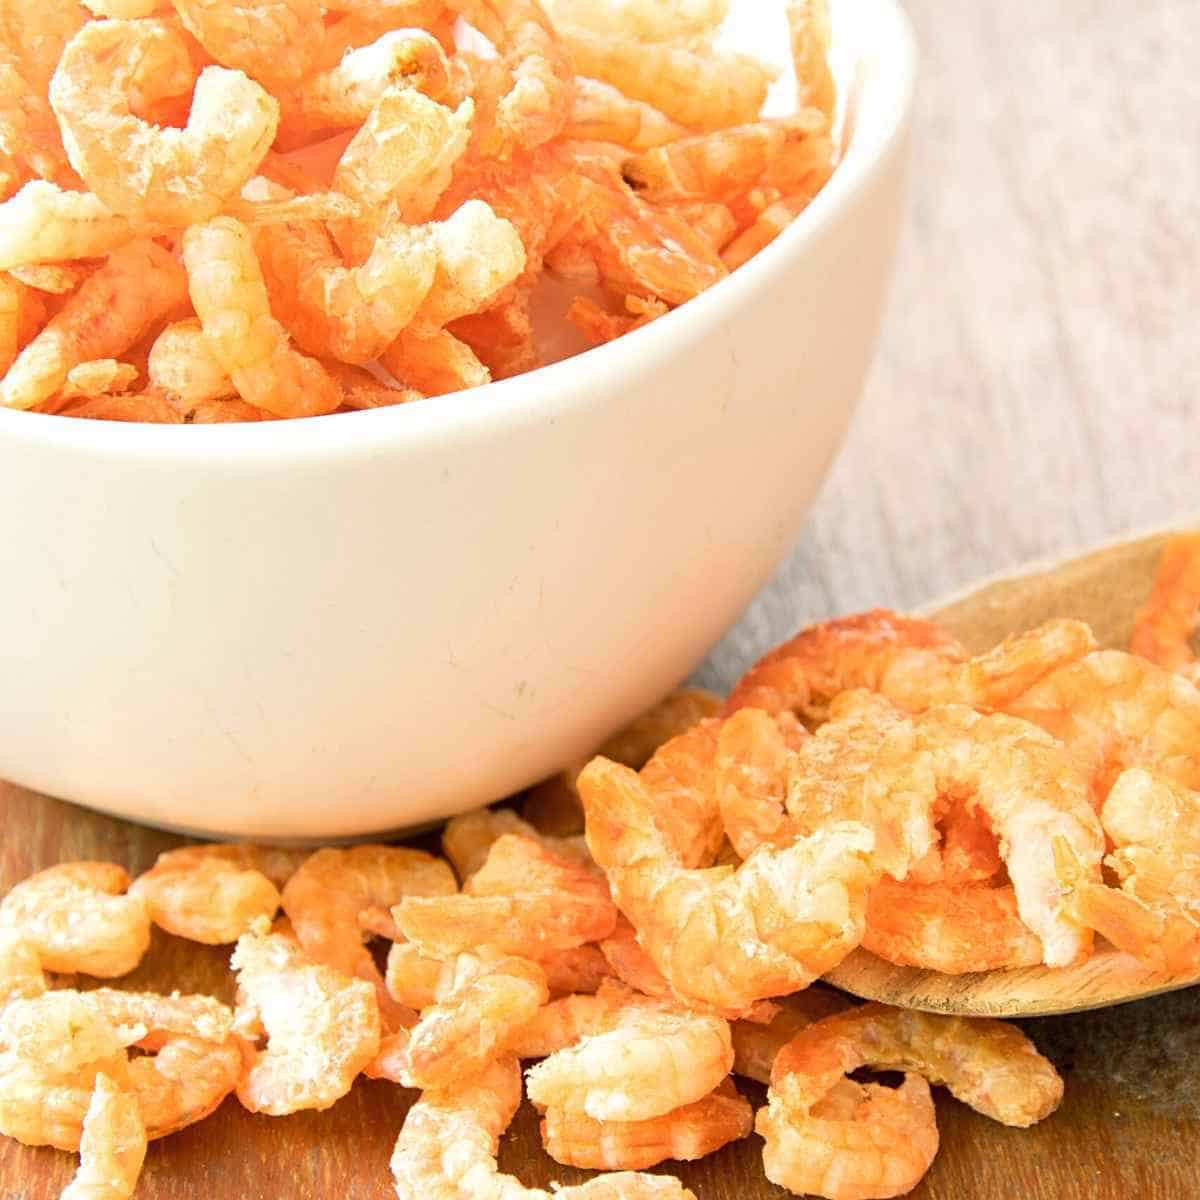 dried shrimps - Is Dry Shrimp Keto? A Nutritionist Ways in with Recipes